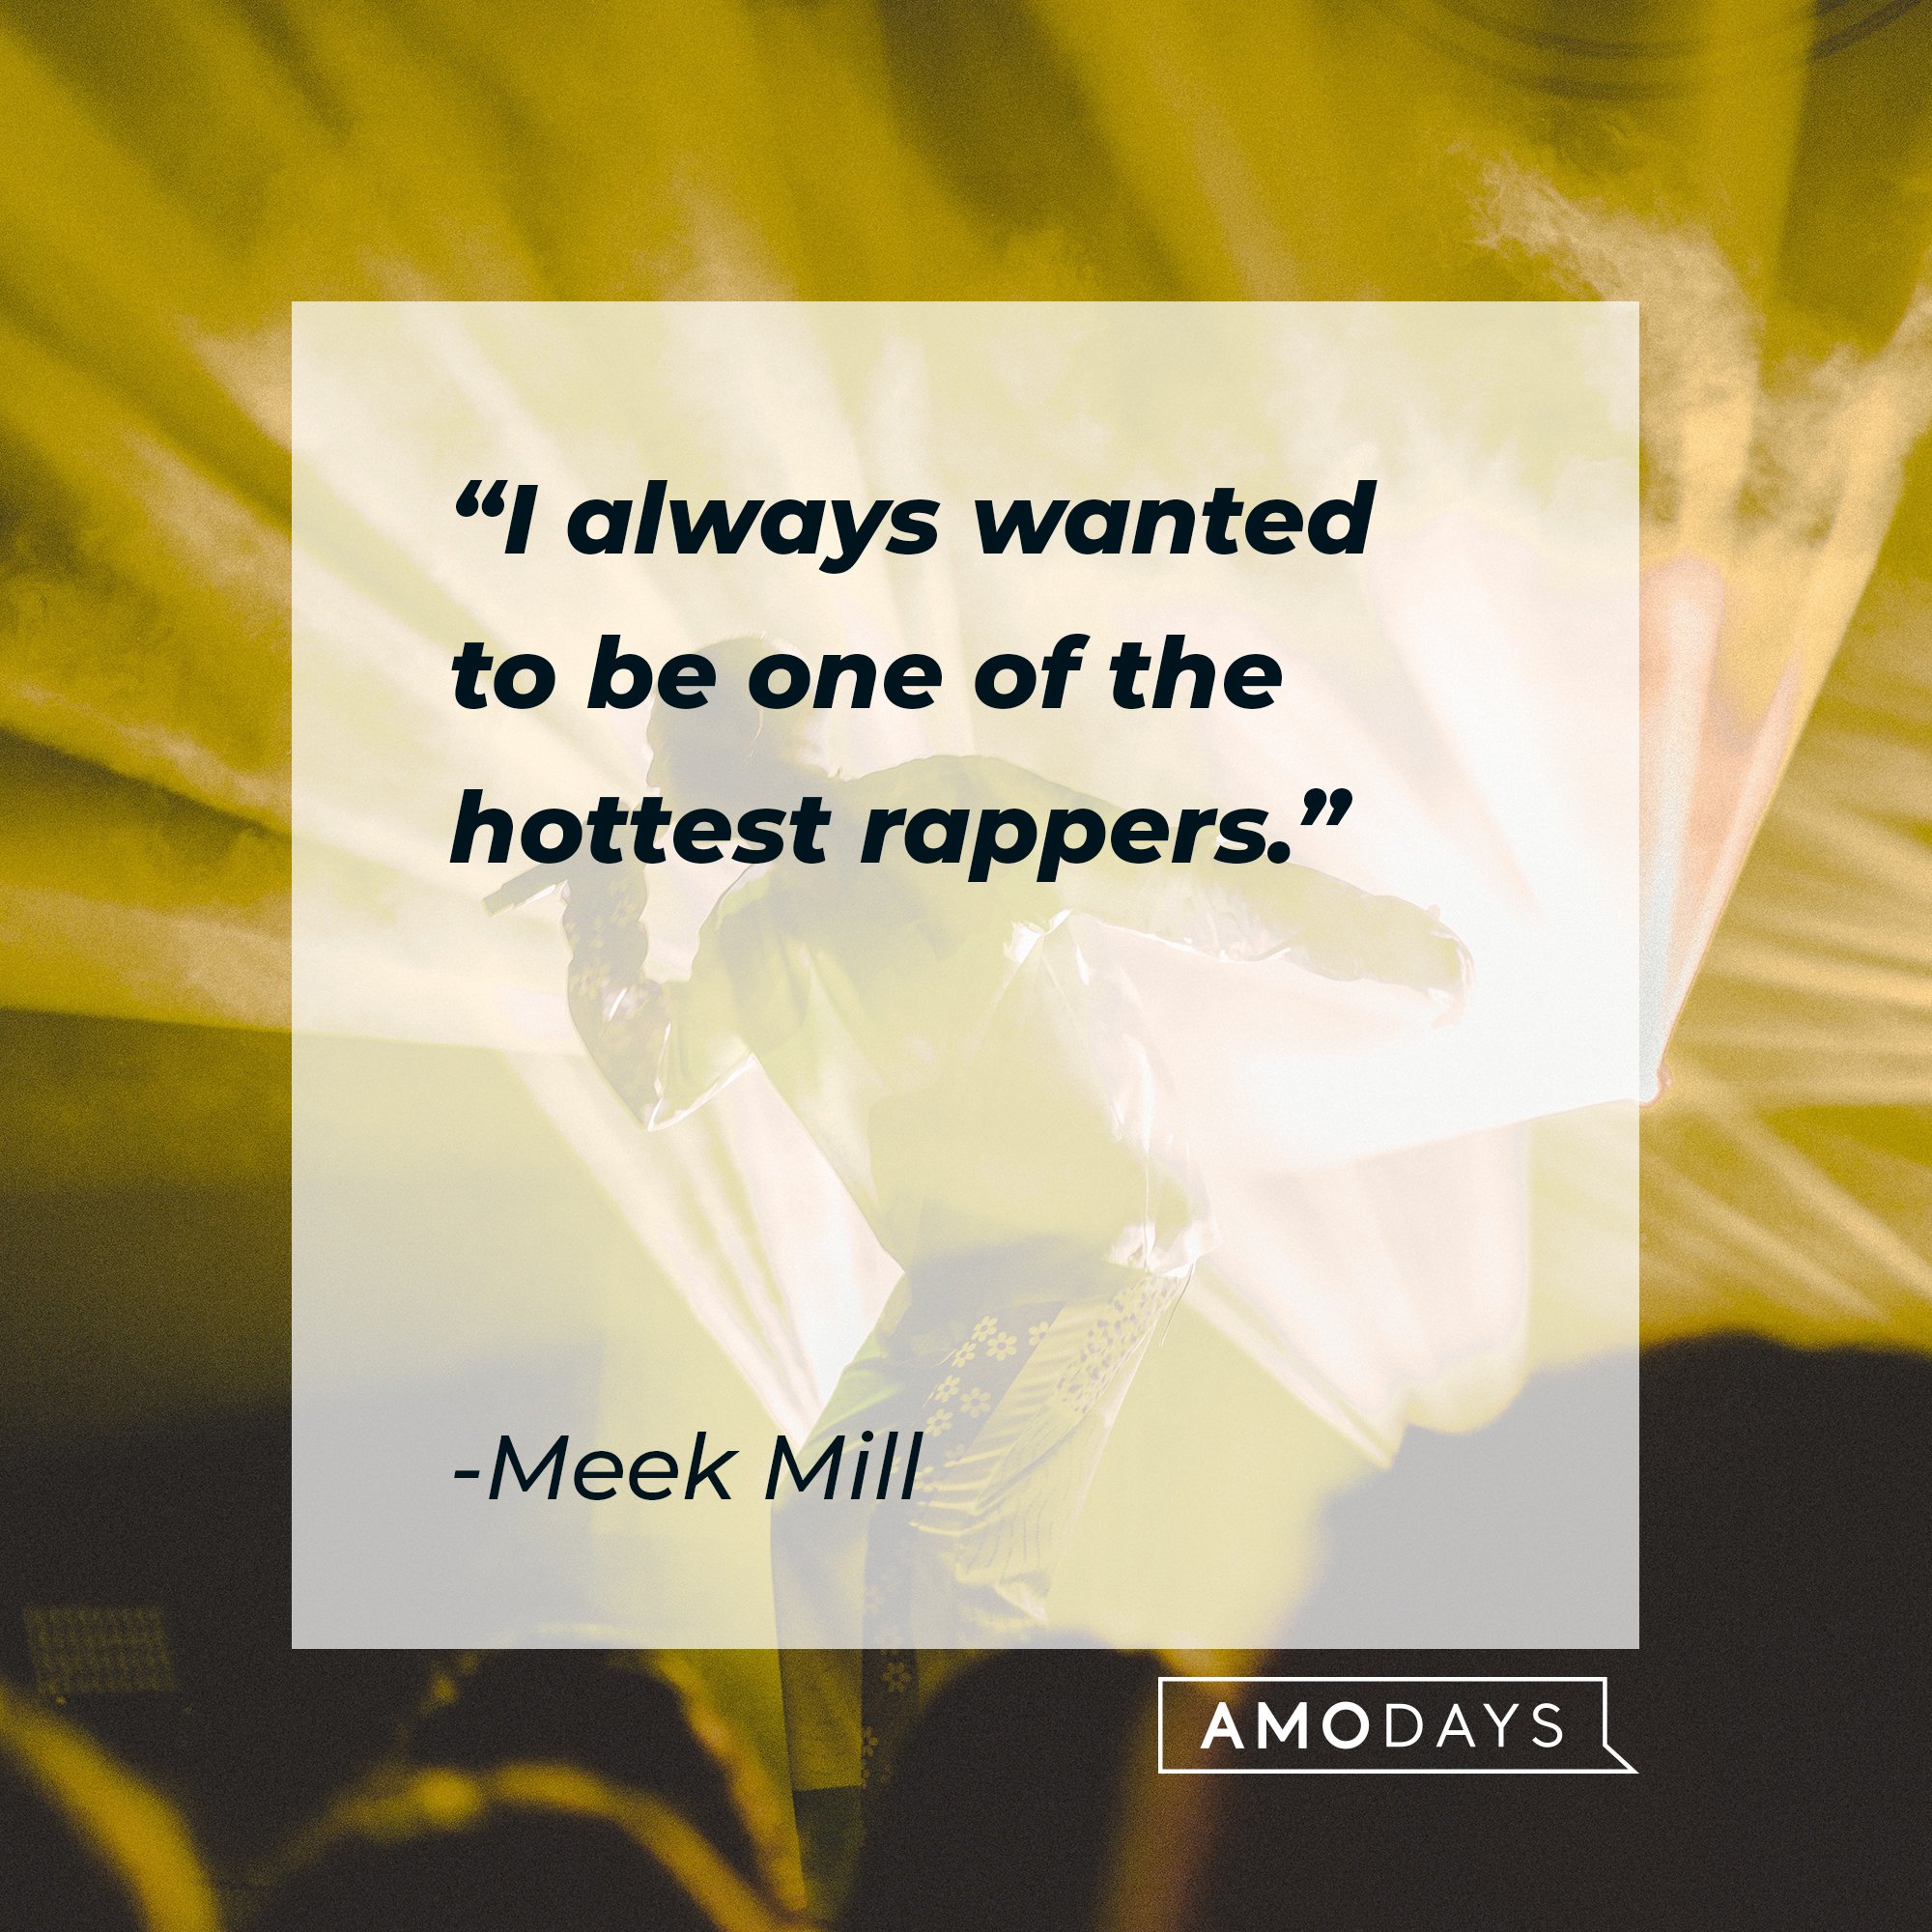  Meek Mill’s quote: "I always wanted to be one of the hottest rappers." | Image: AmoDays 